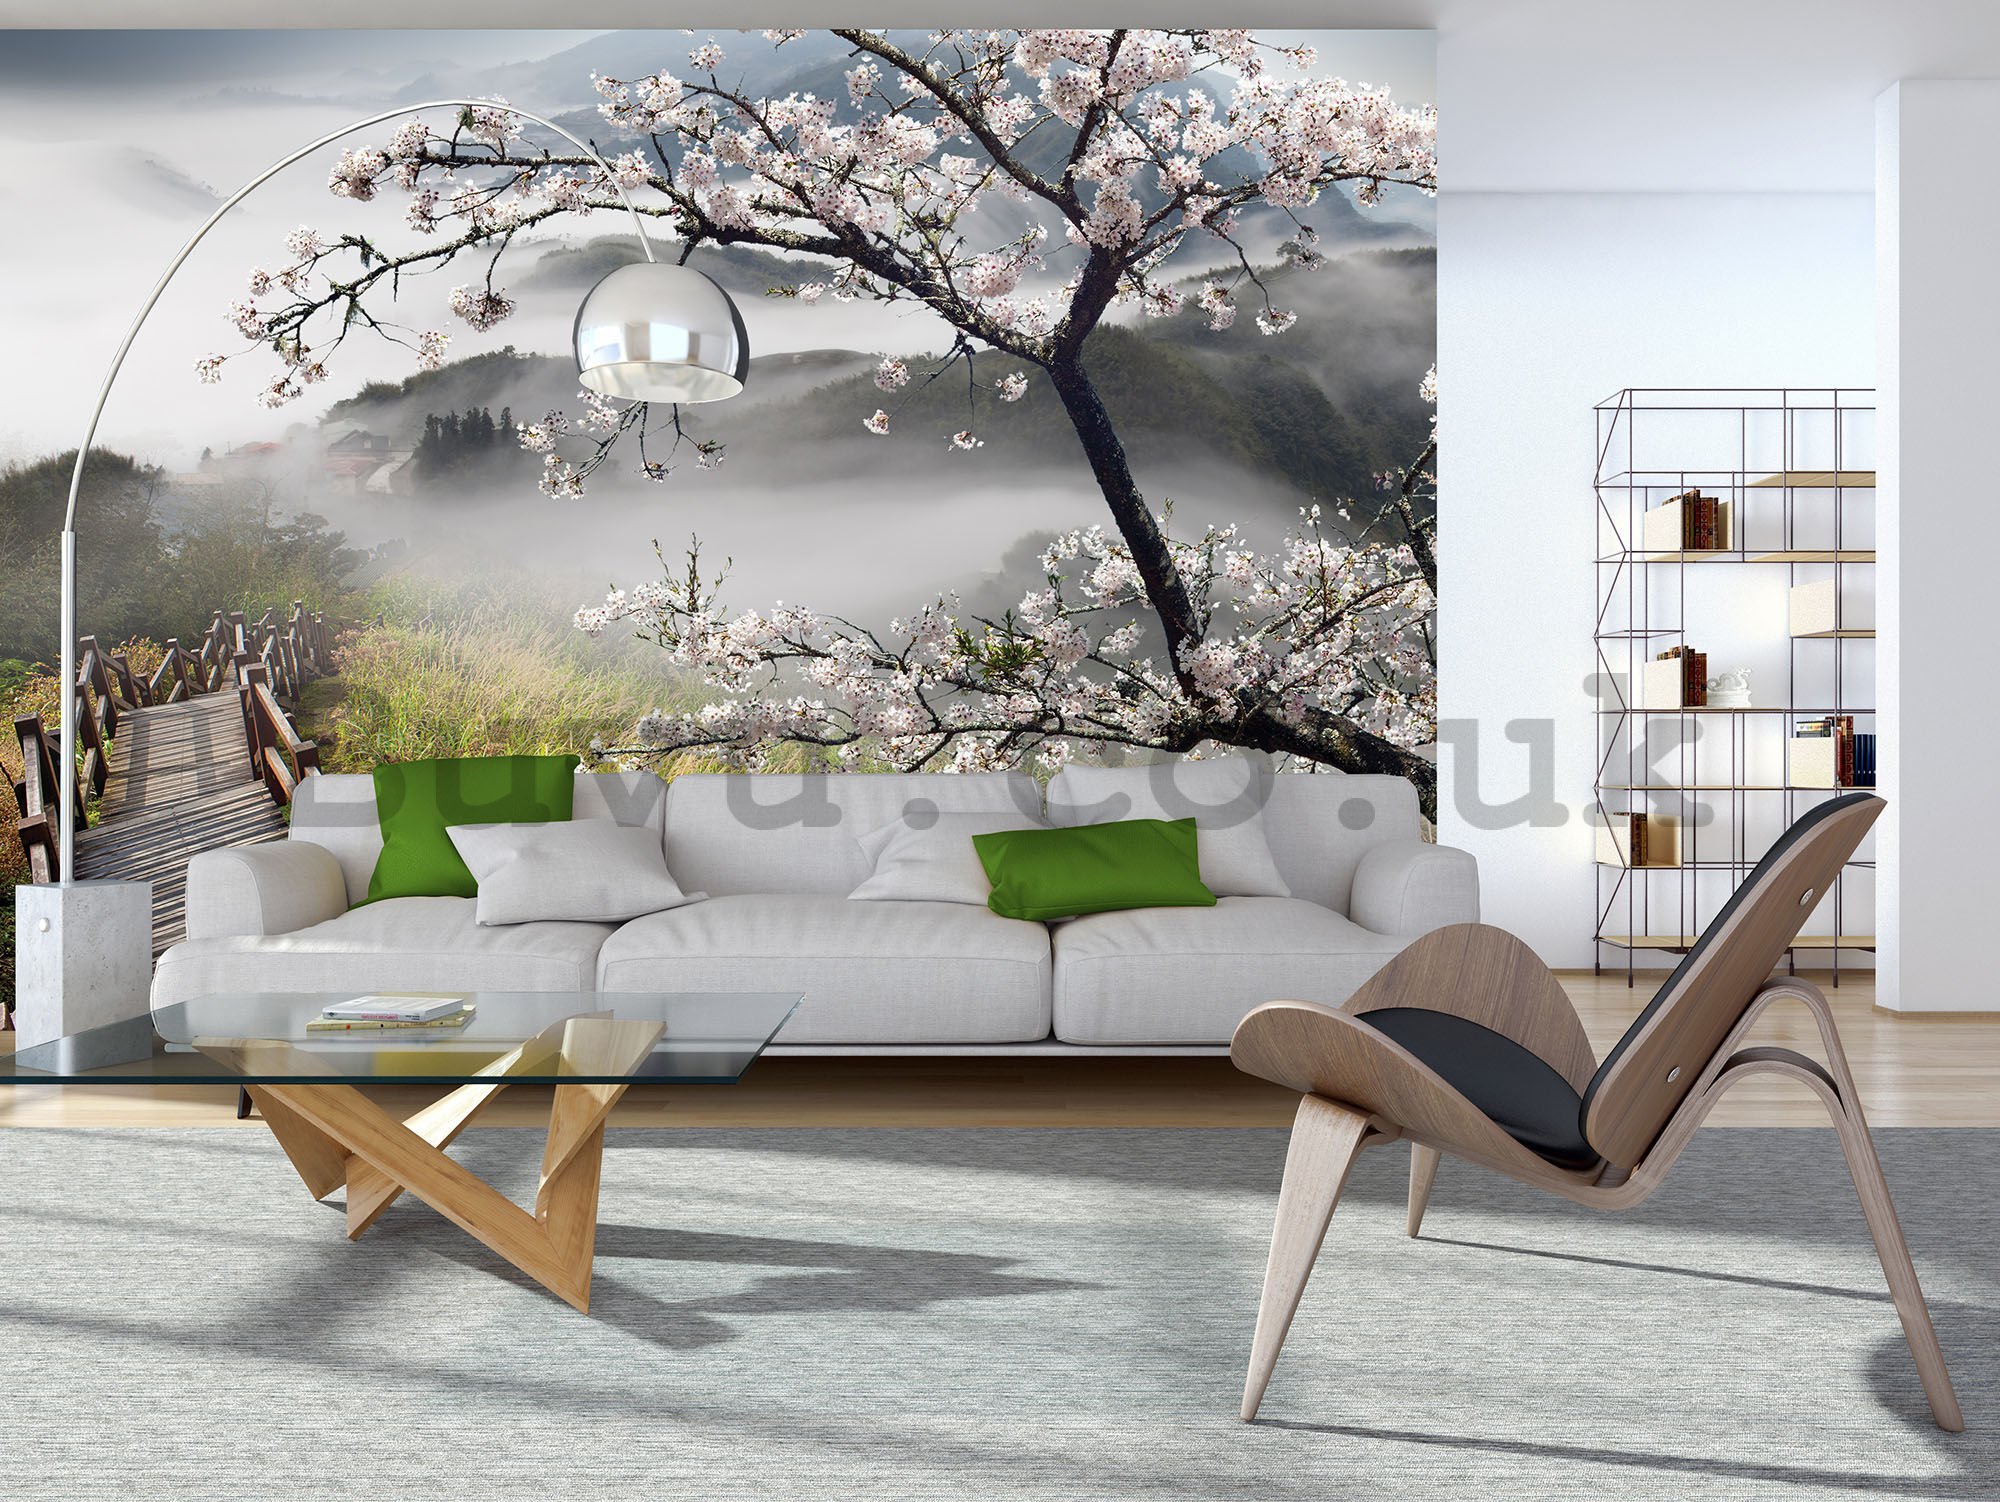 Wall mural vlies: Cherry tree above the stairs - 184x254 cm